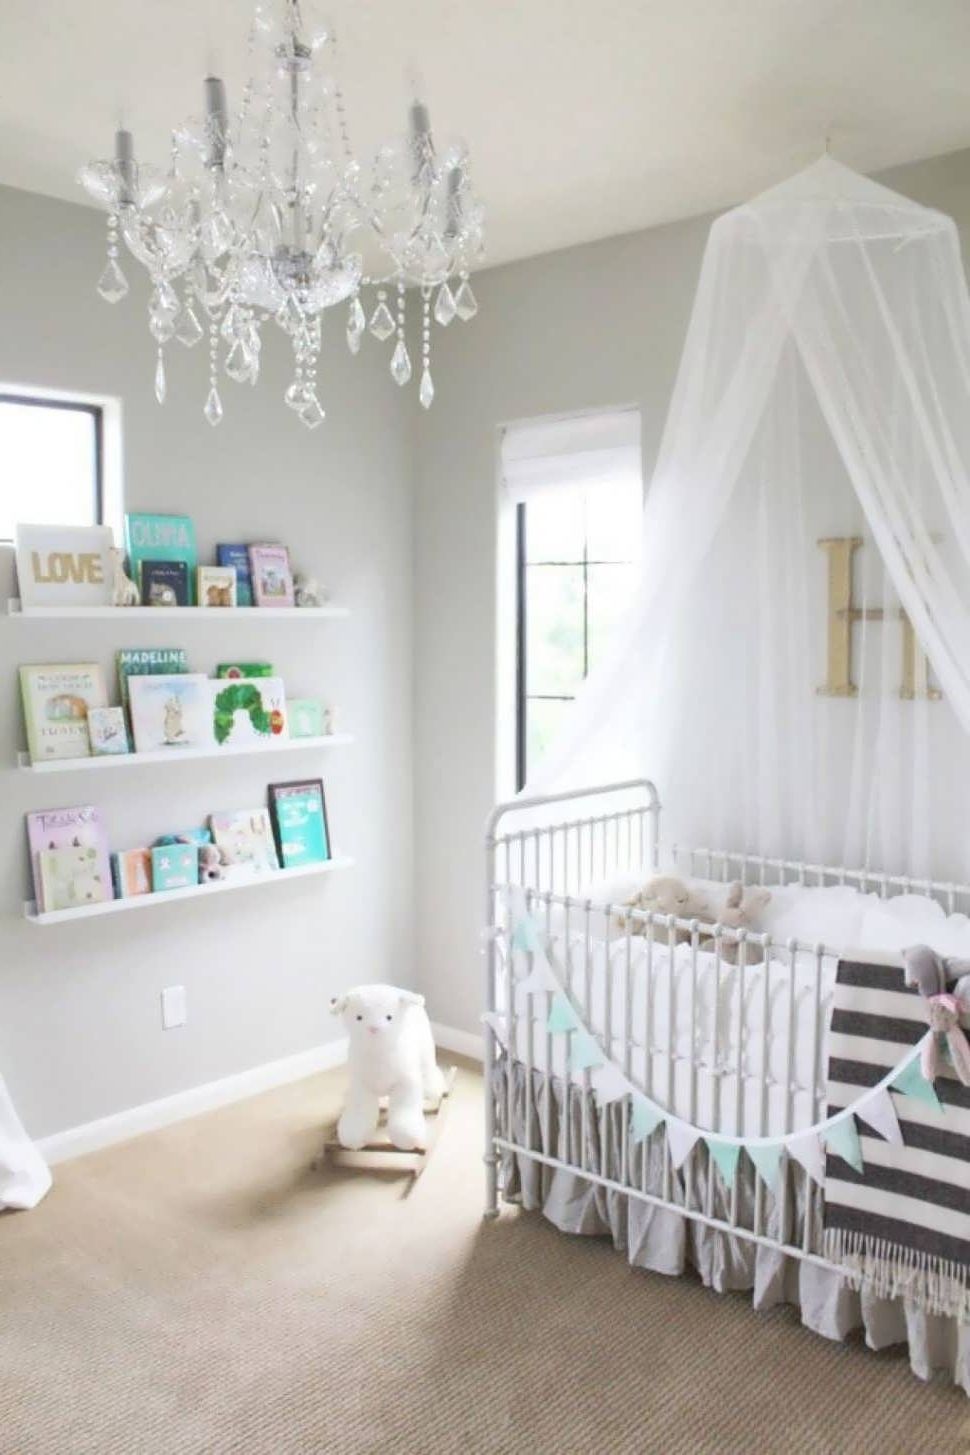 Favorite Chandelier : Nursery Chandelier Toddler Lamp Lamps For Girl Room Pertaining To Mini Chandeliers For Nursery (View 1 of 20)